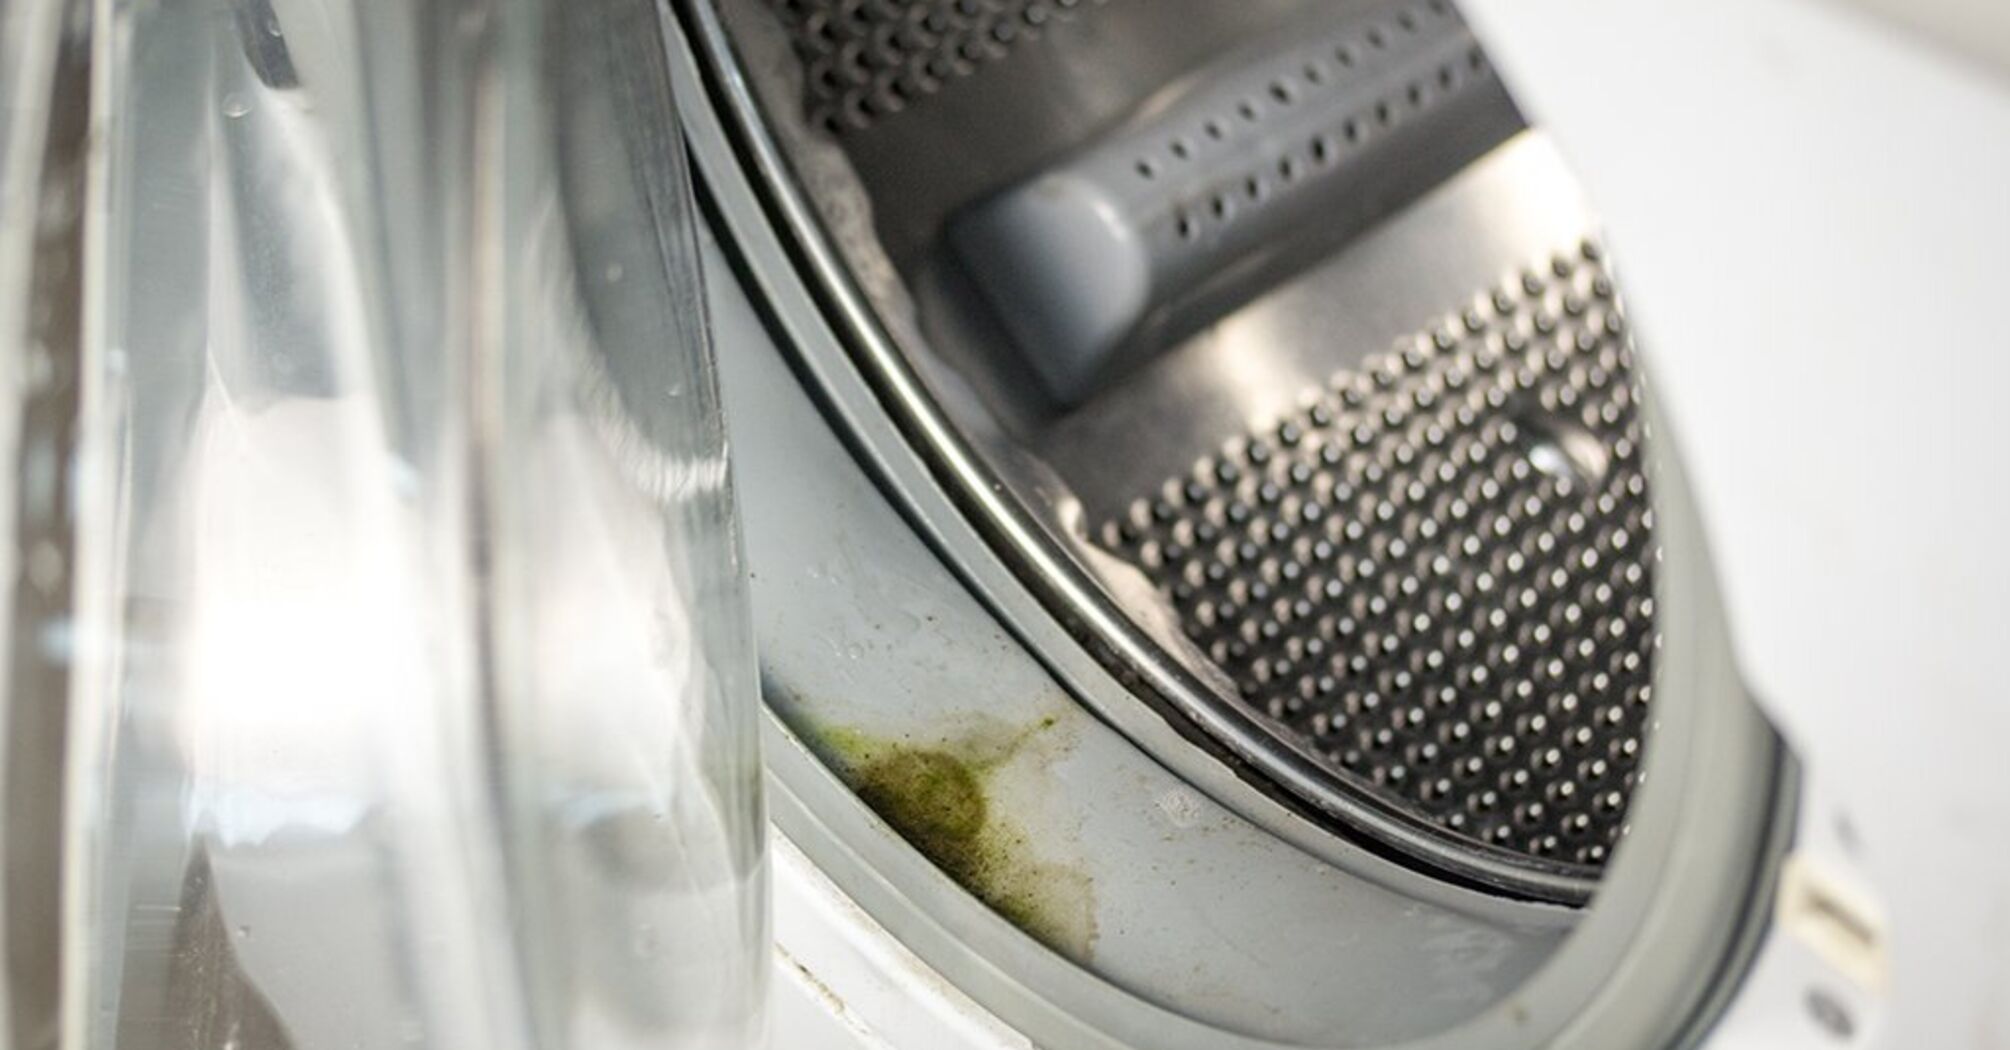 How to get rid of mold and odor from your washing machine: effective tips